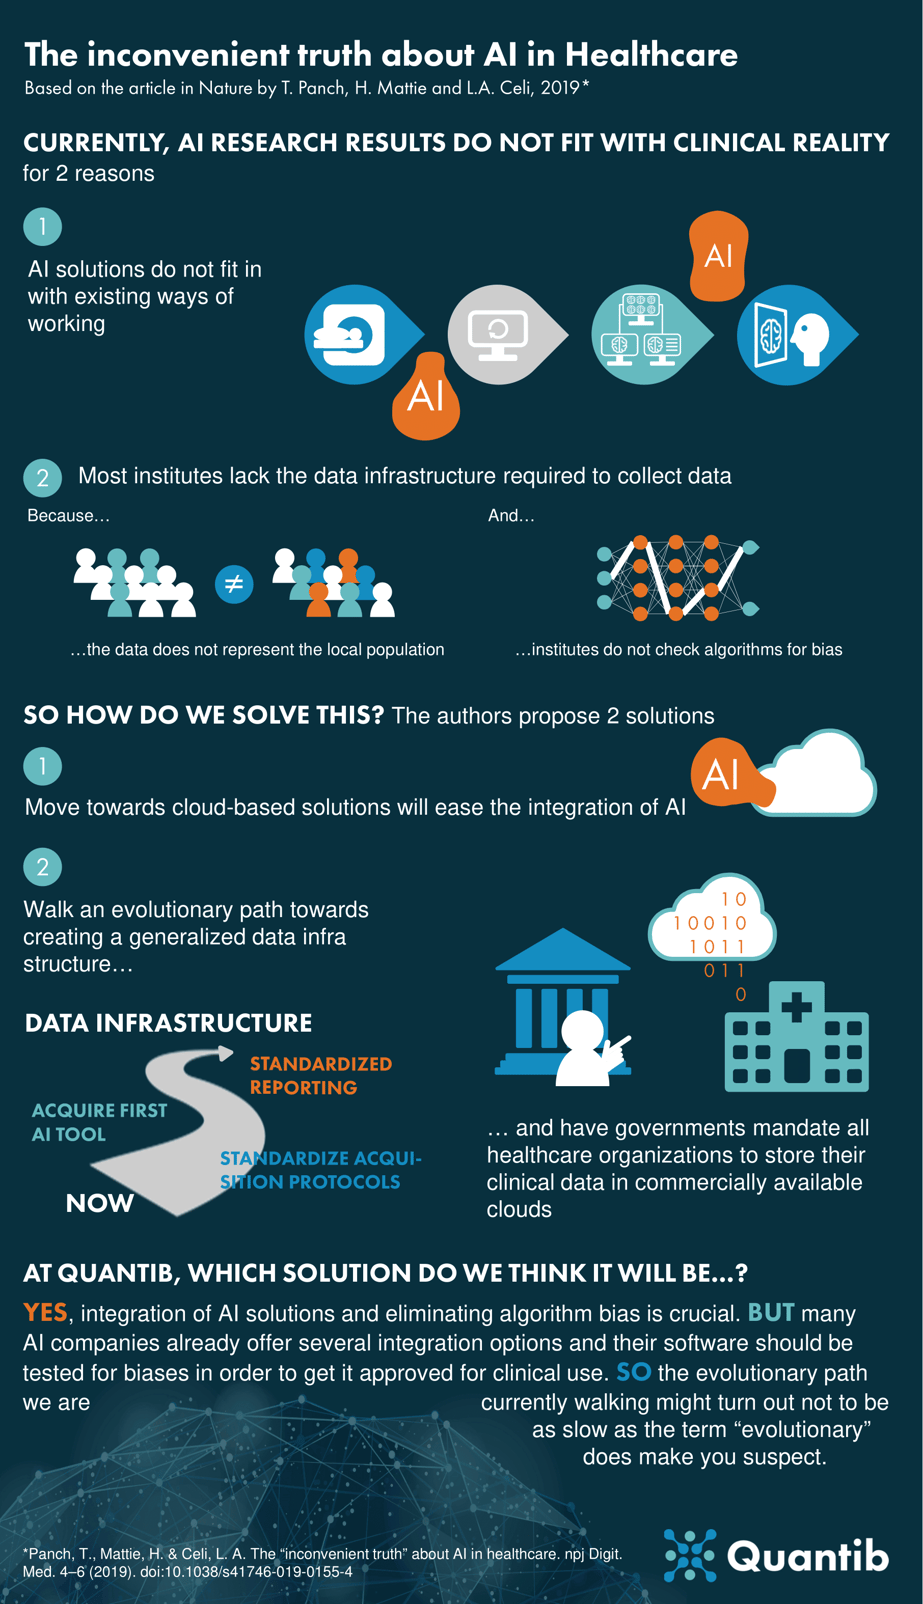 190903 - Infographic - The inconvenient truth about AI in healthcare v3-1 (1) (1) (1)